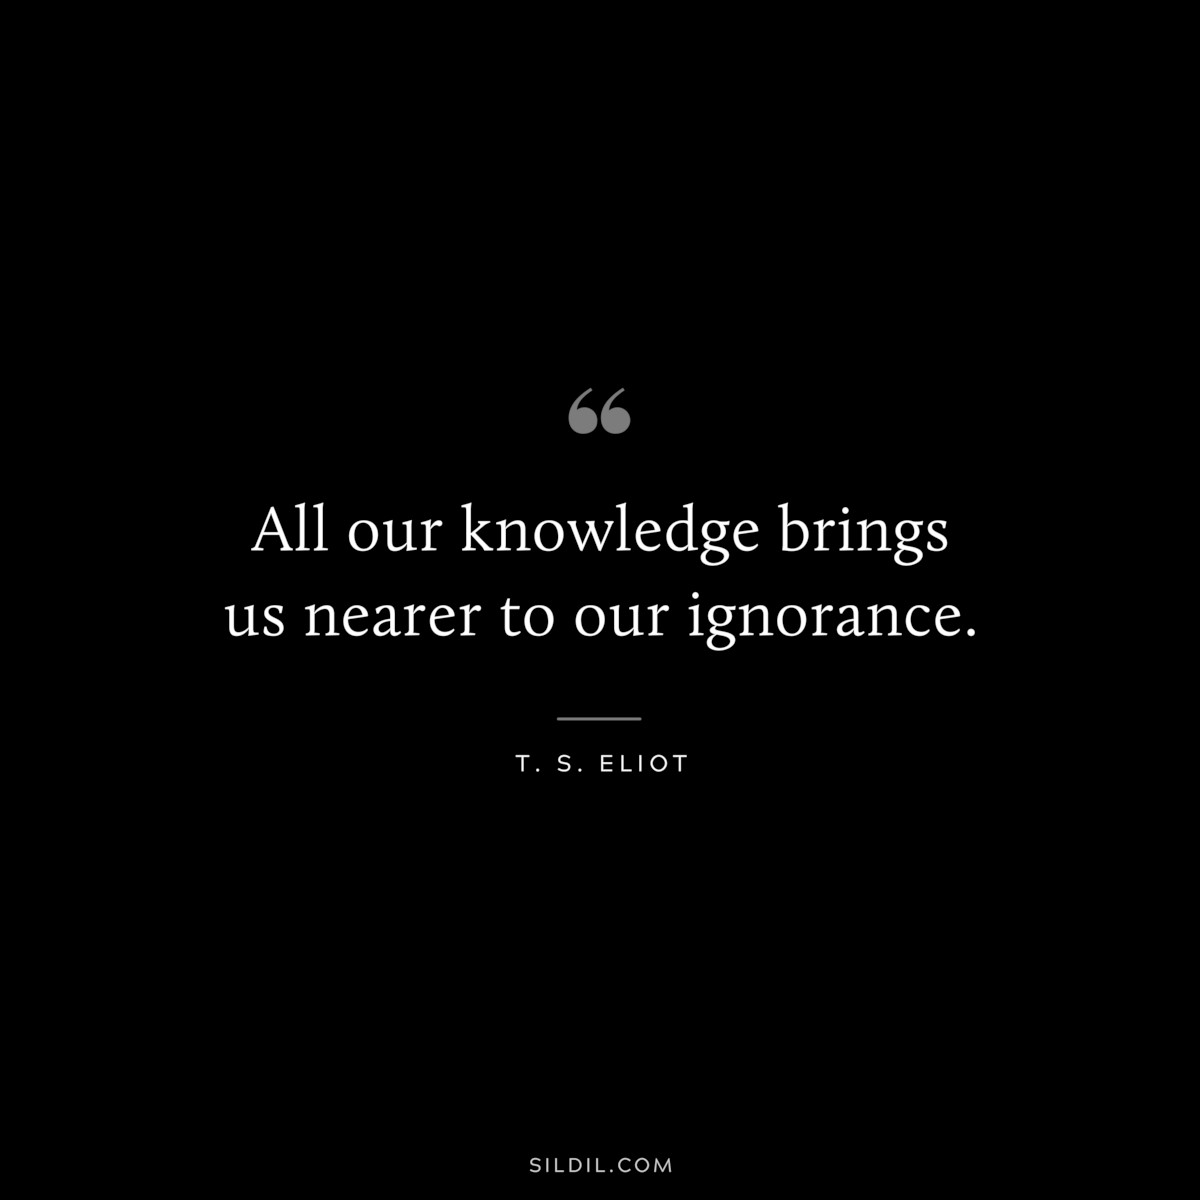 All our knowledge brings us nearer to our ignorance. ― T. S. Eliot